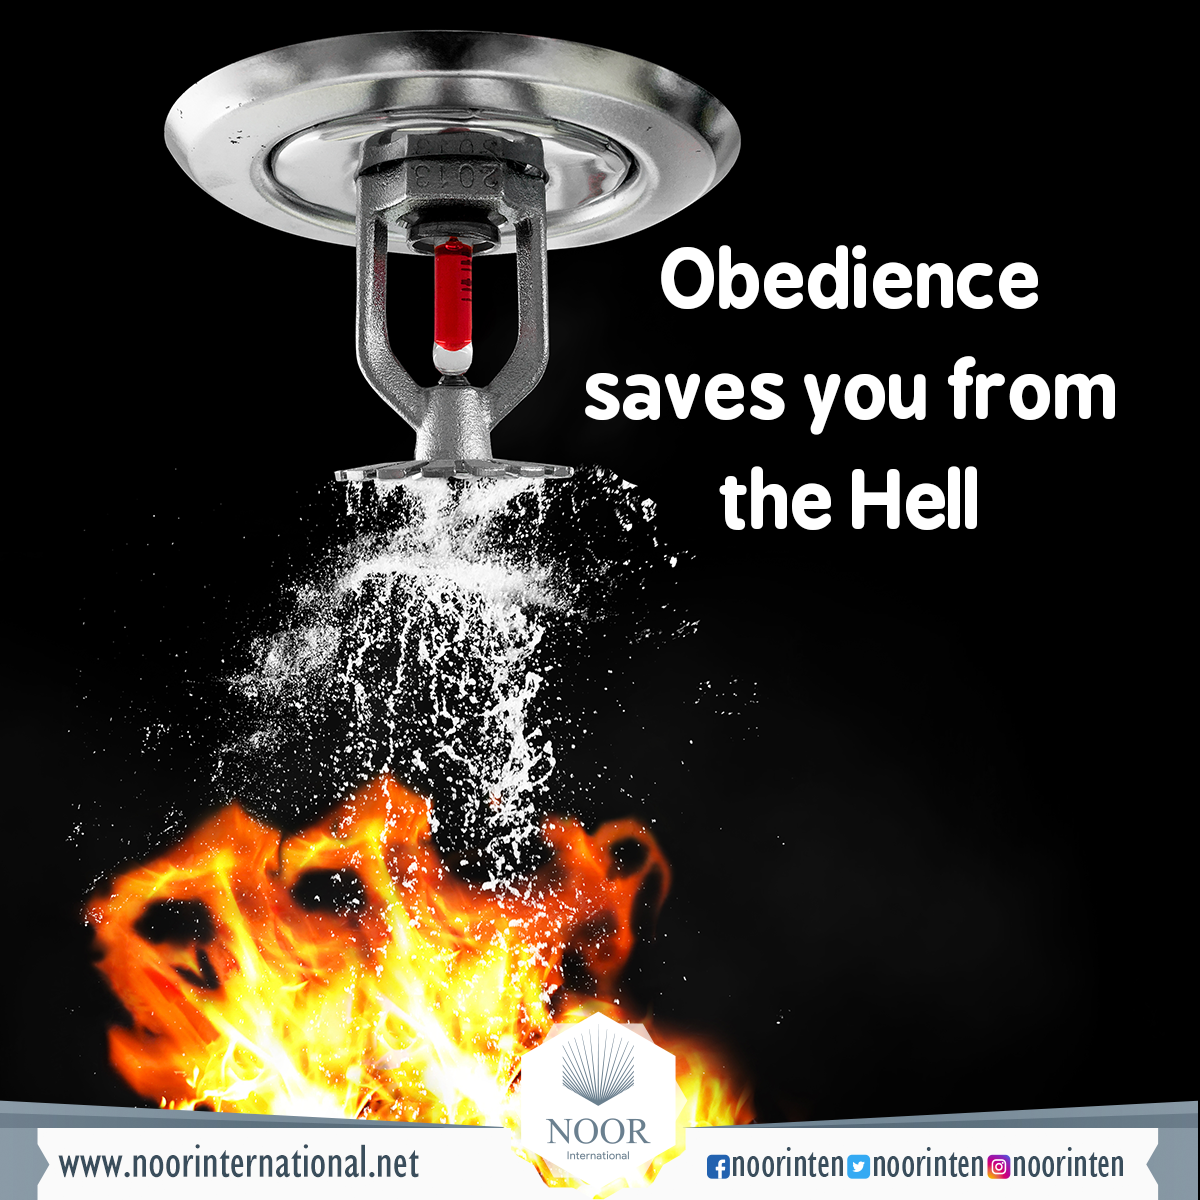 Obedience saves you from the Hell